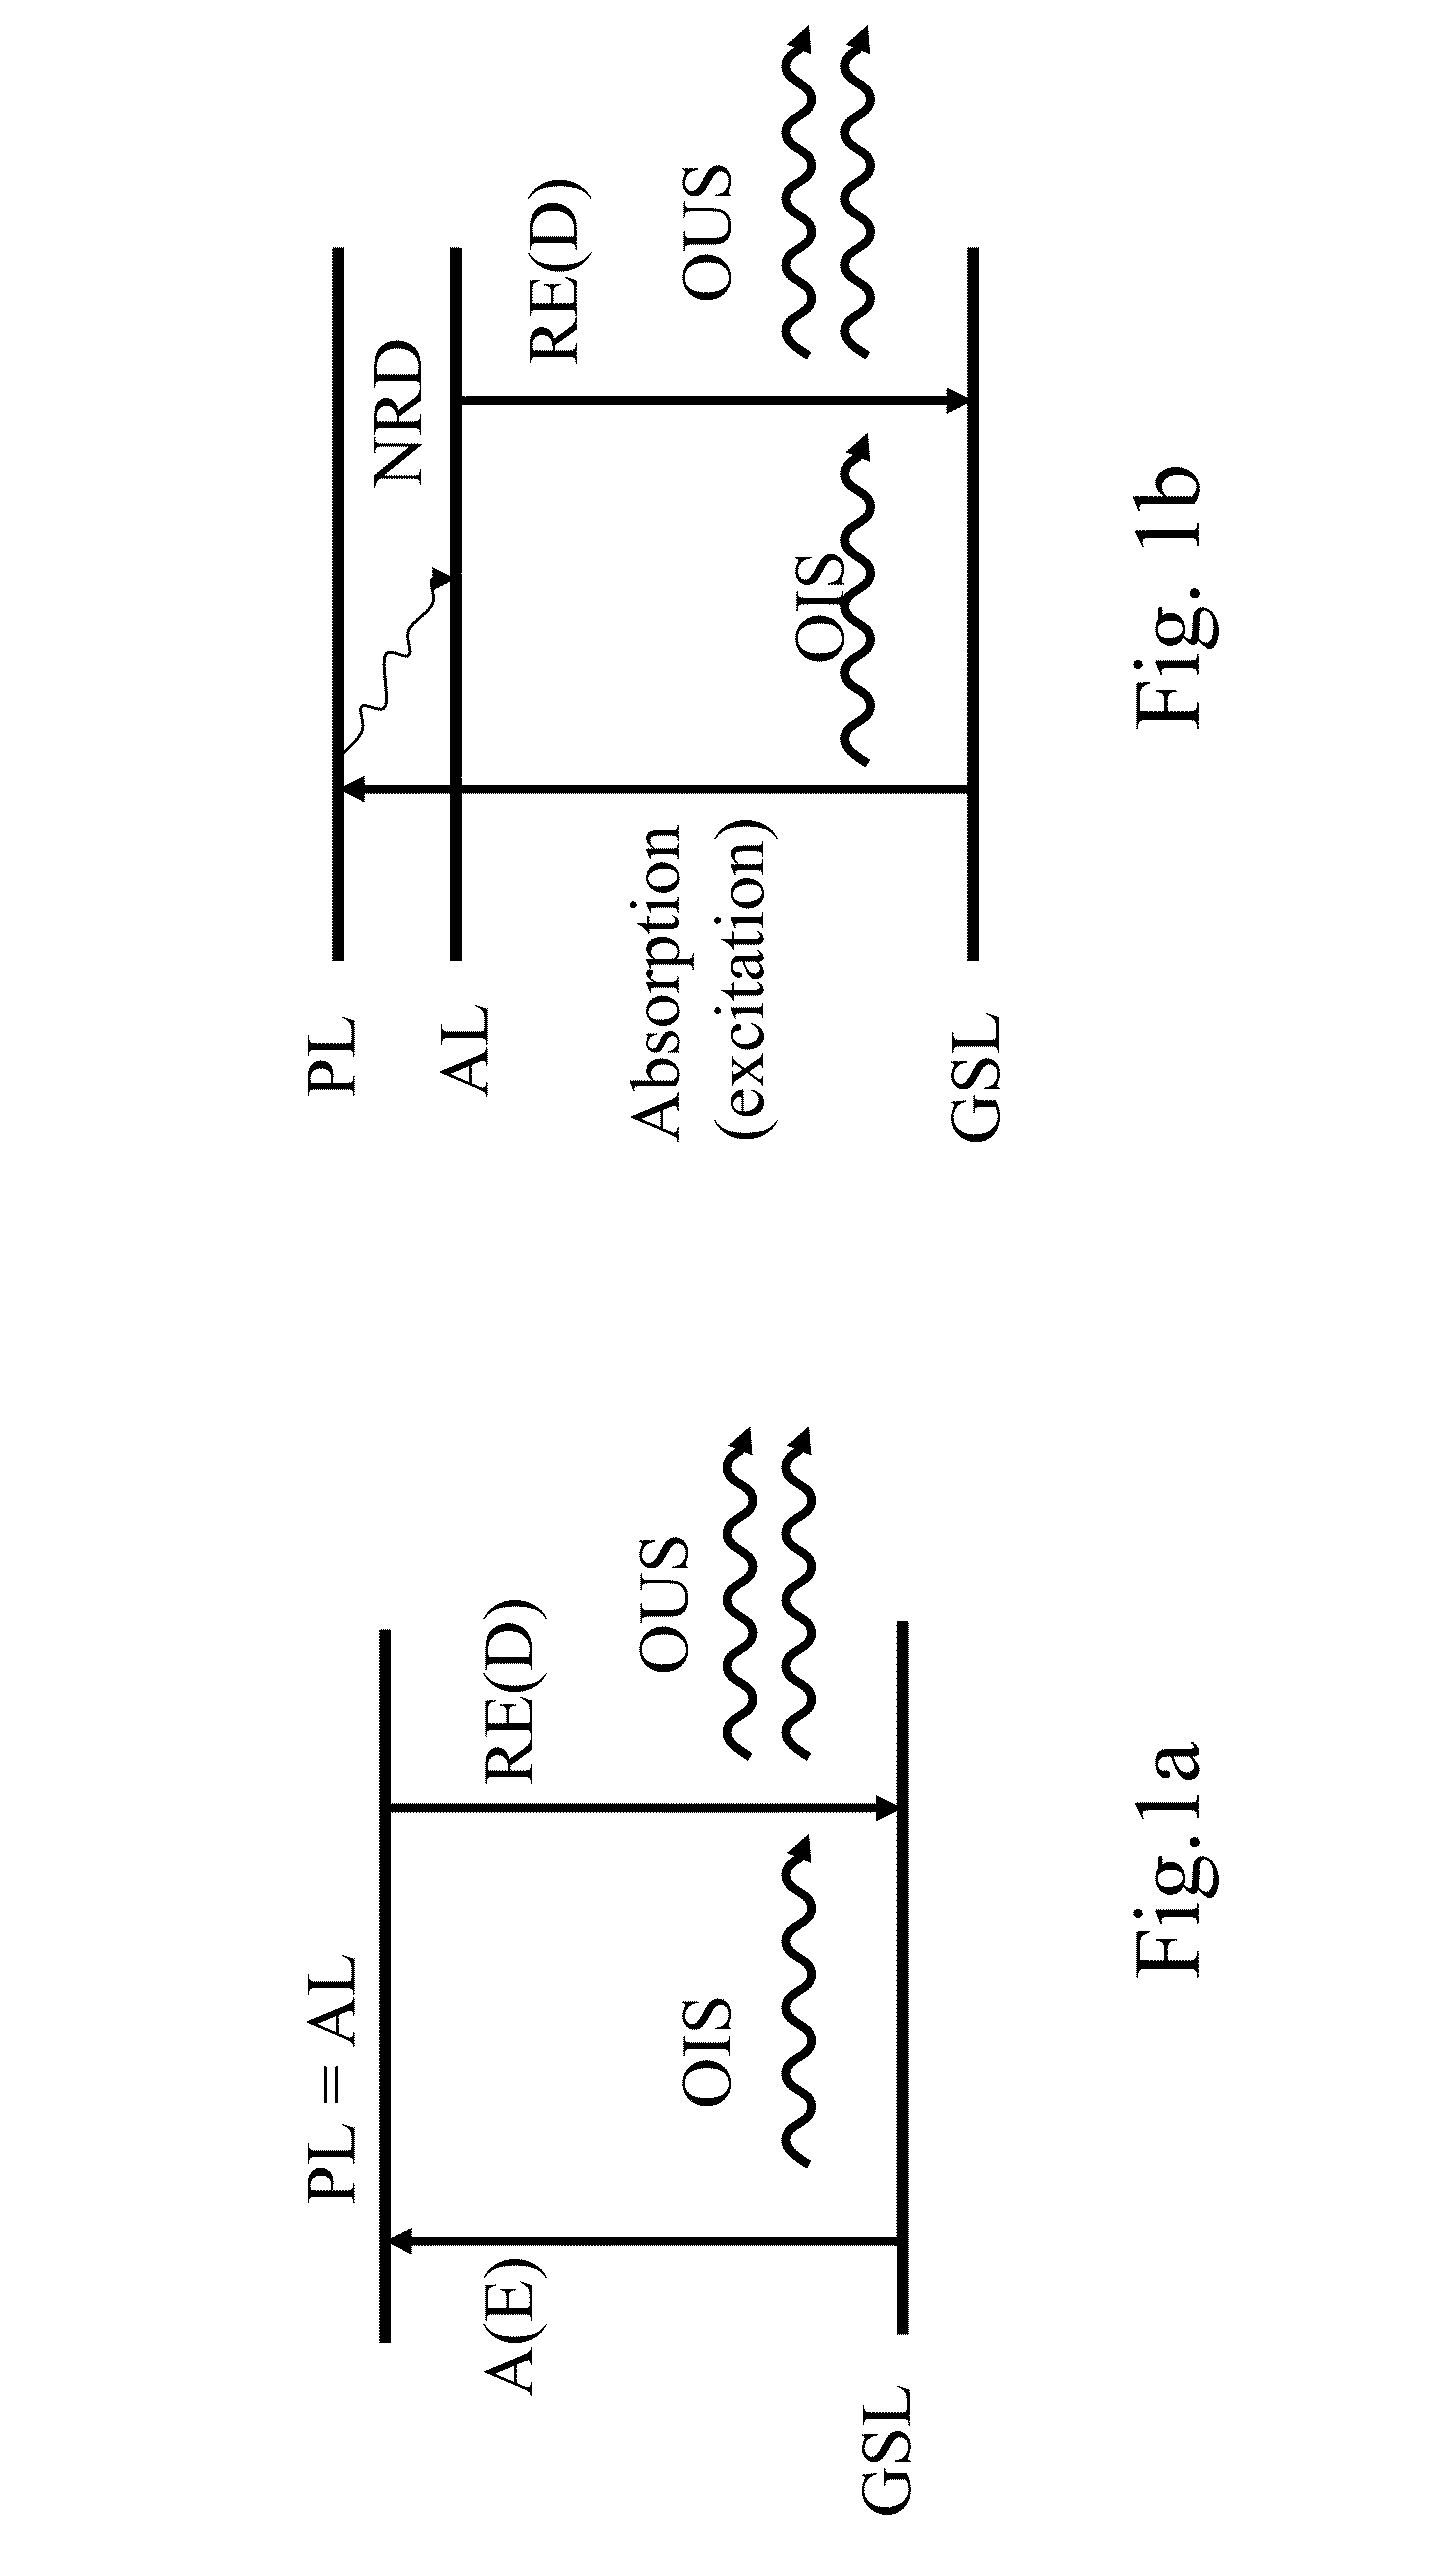 Amplifying Optical Fiber and Method of Manufacturing